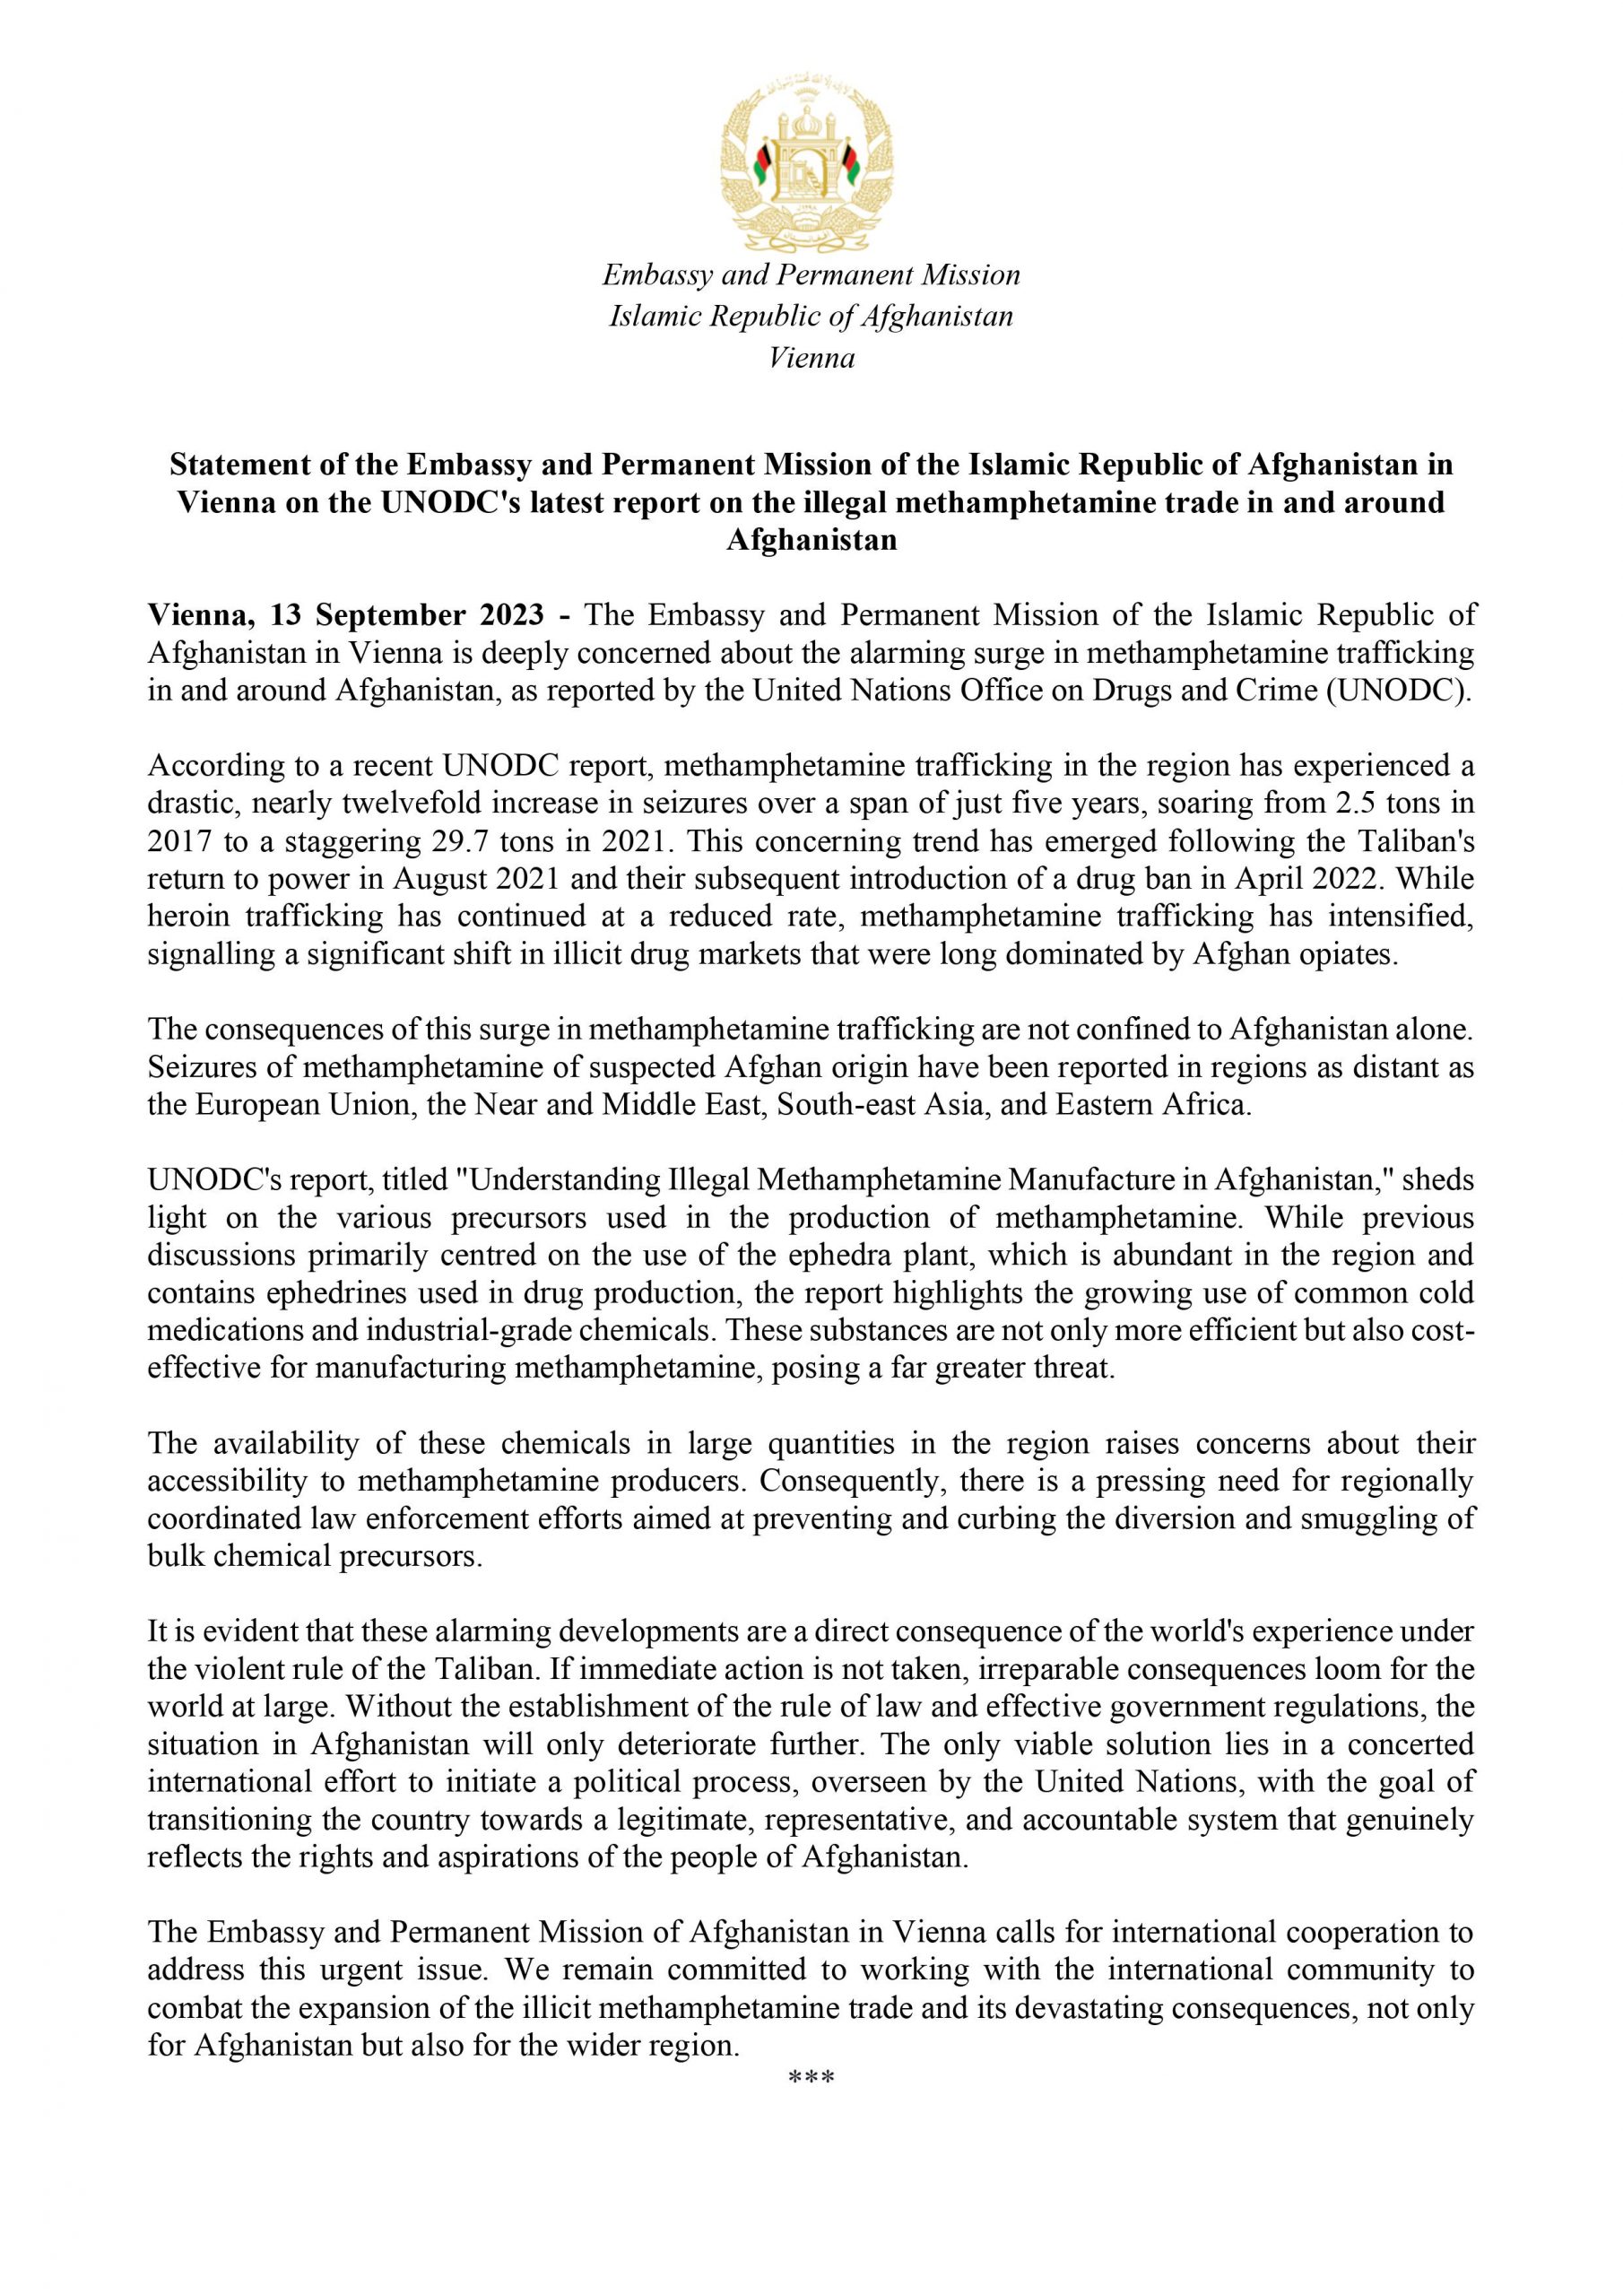 Statement of the Embassy and Permanent Mission of the Islamic Republic of Afghanistan in Vienna on the UNODC’s latest report on the illegal methamphetamine trade in and around Afghanistan